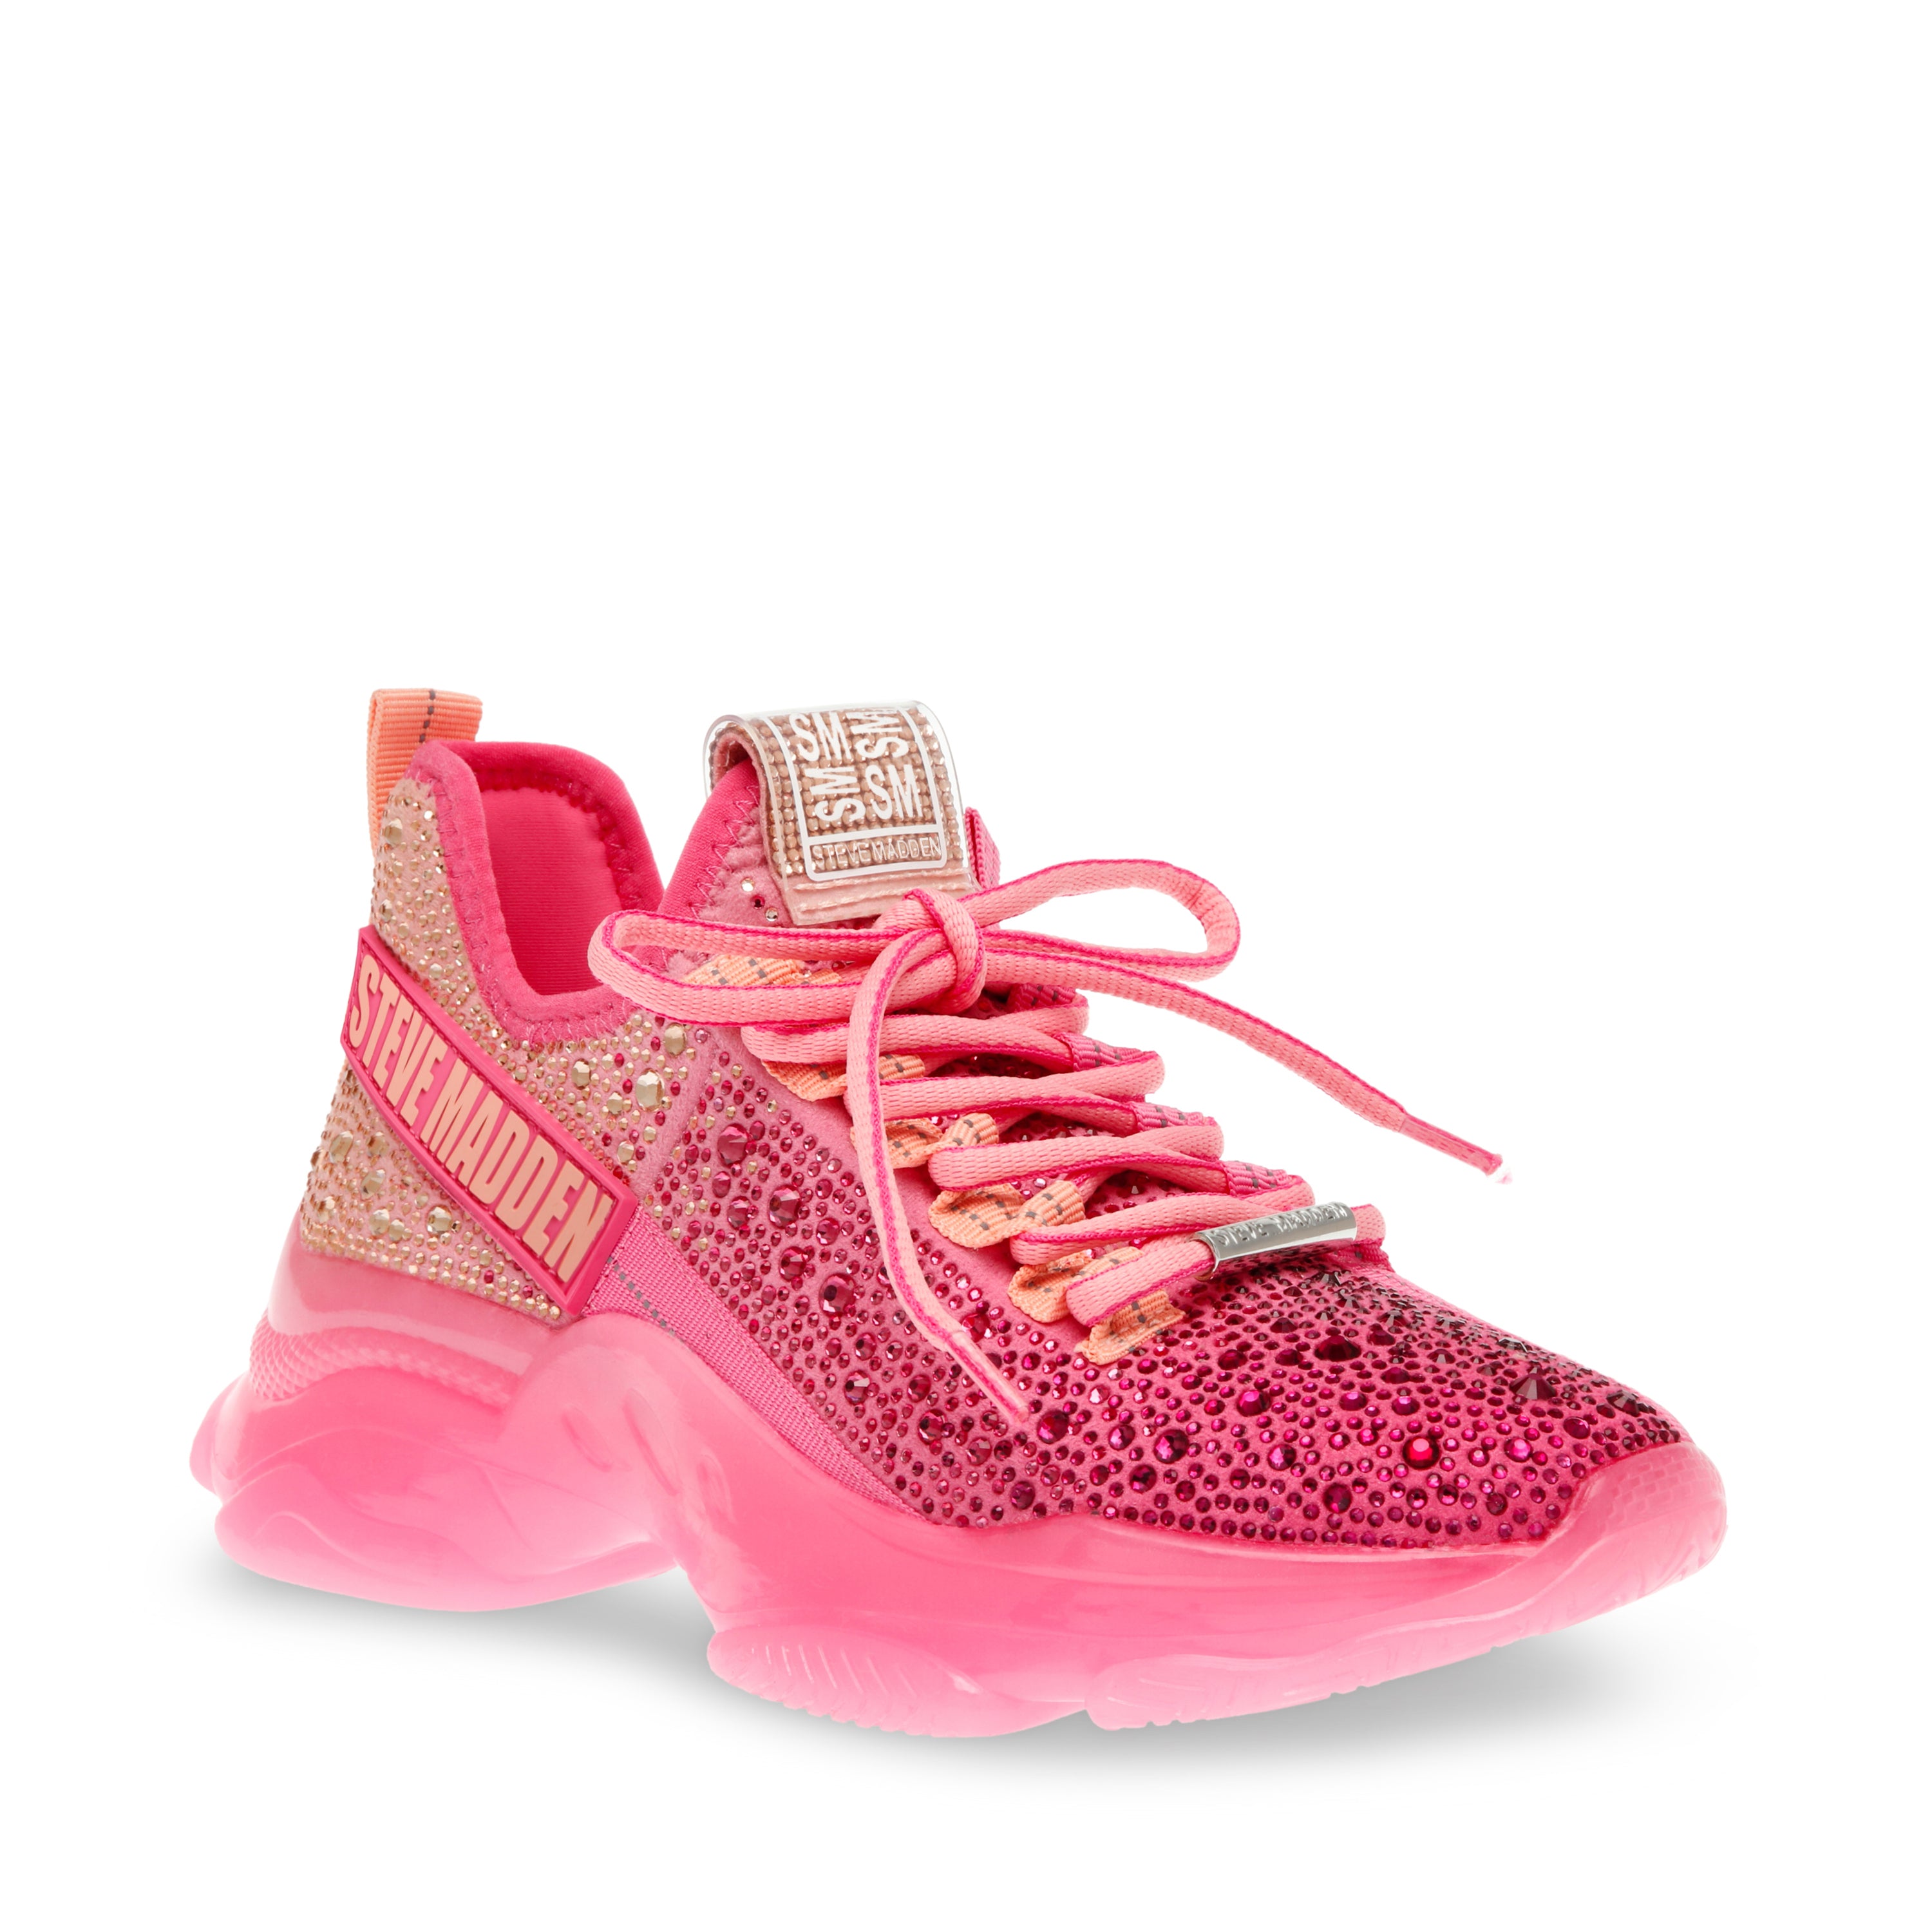 Mistica Sneaker Pink Candy- Hover Image